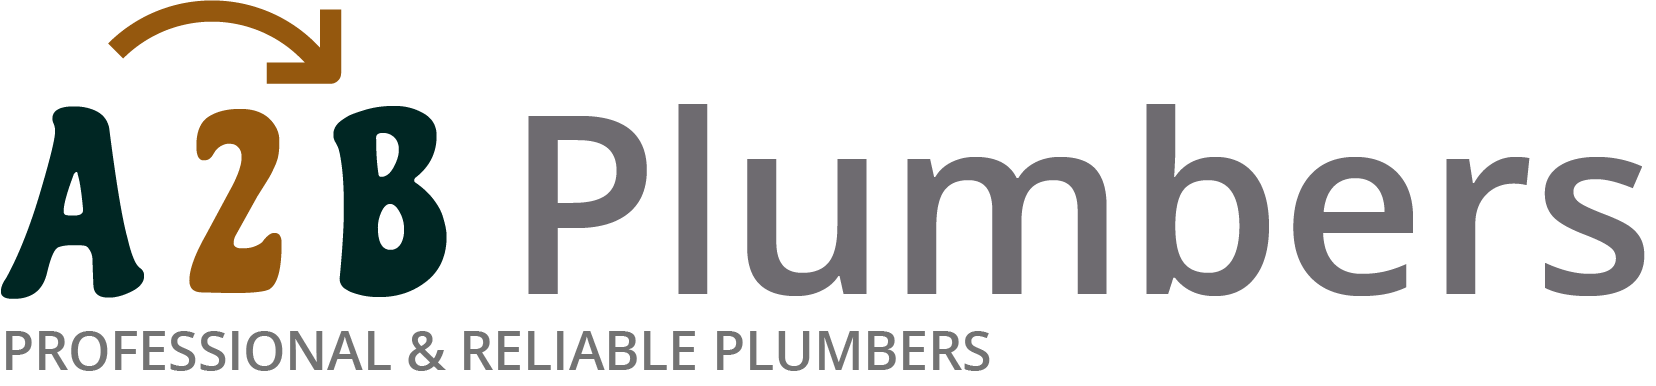 If you need a boiler installed, a radiator repaired or a leaking tap fixed, call us now - we provide services for properties in Midhurst and the local area.